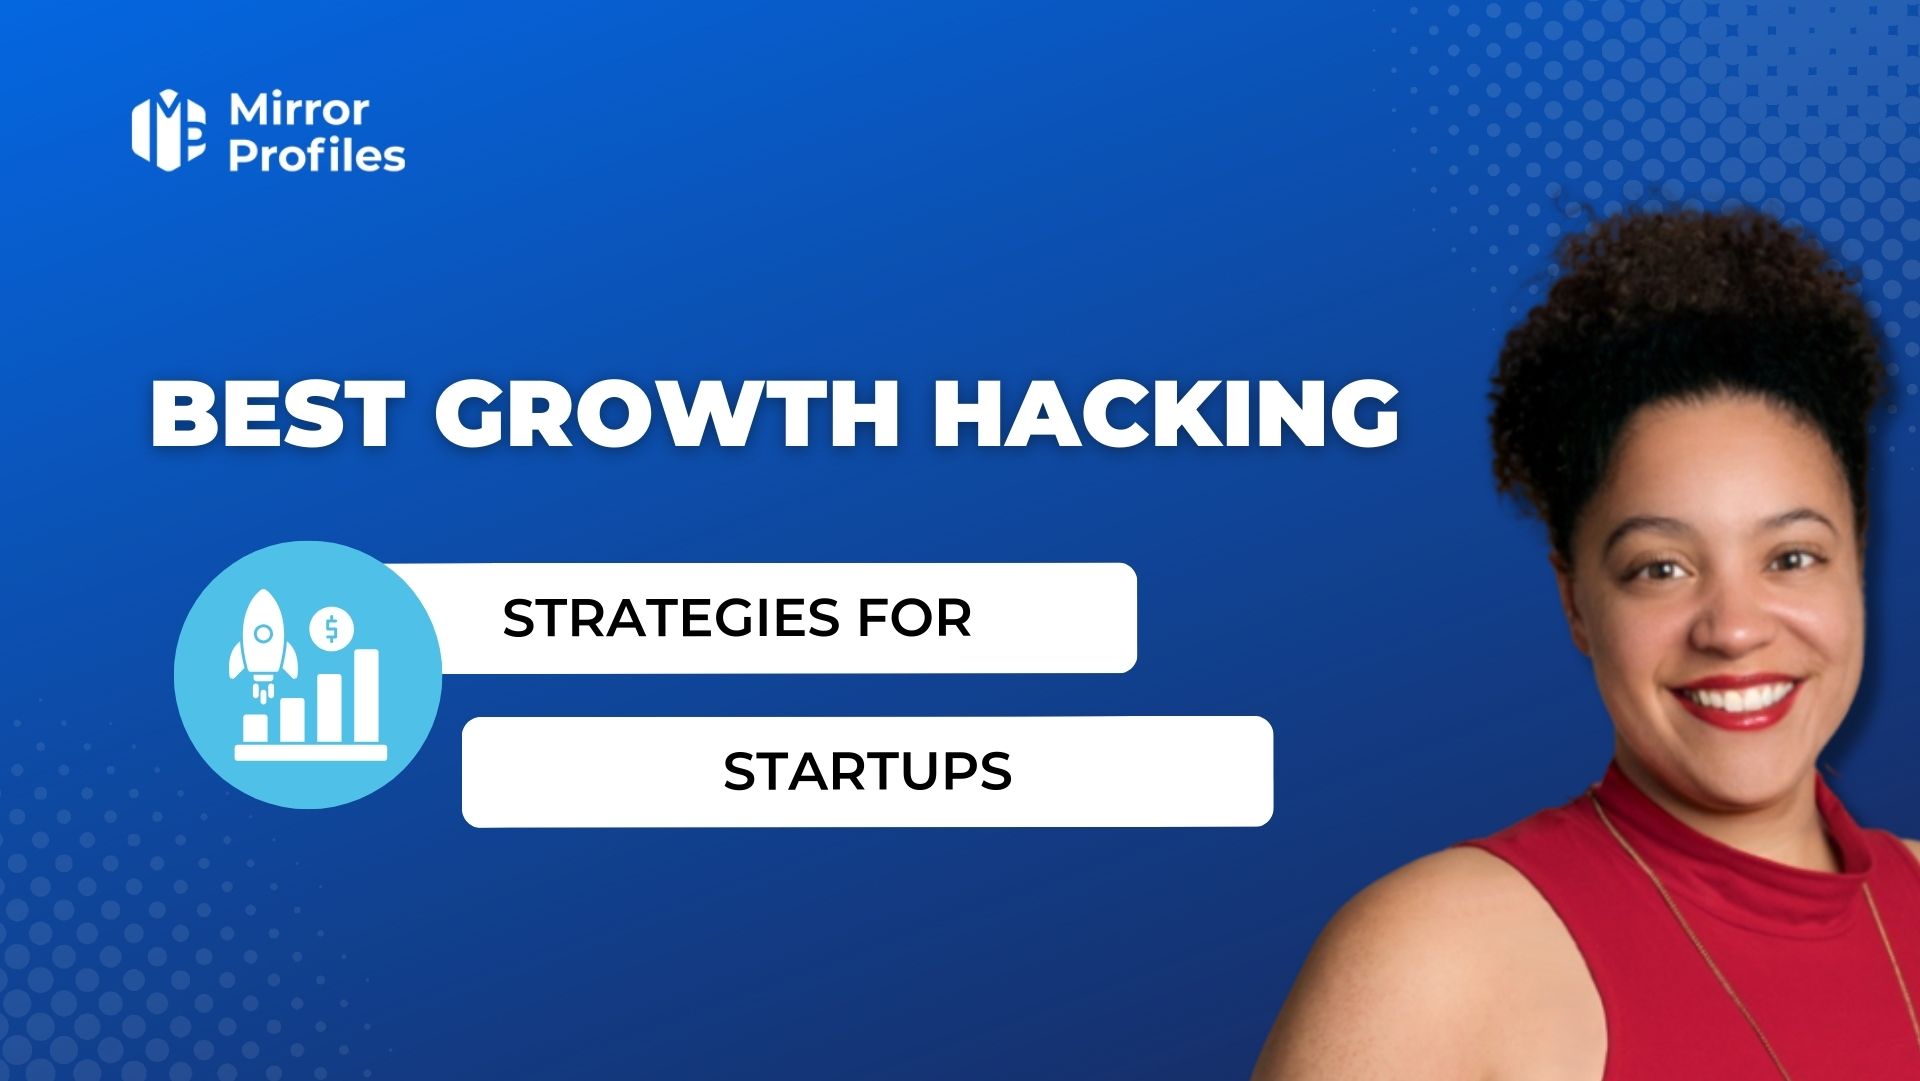 Best growth hacking strategies for stratups